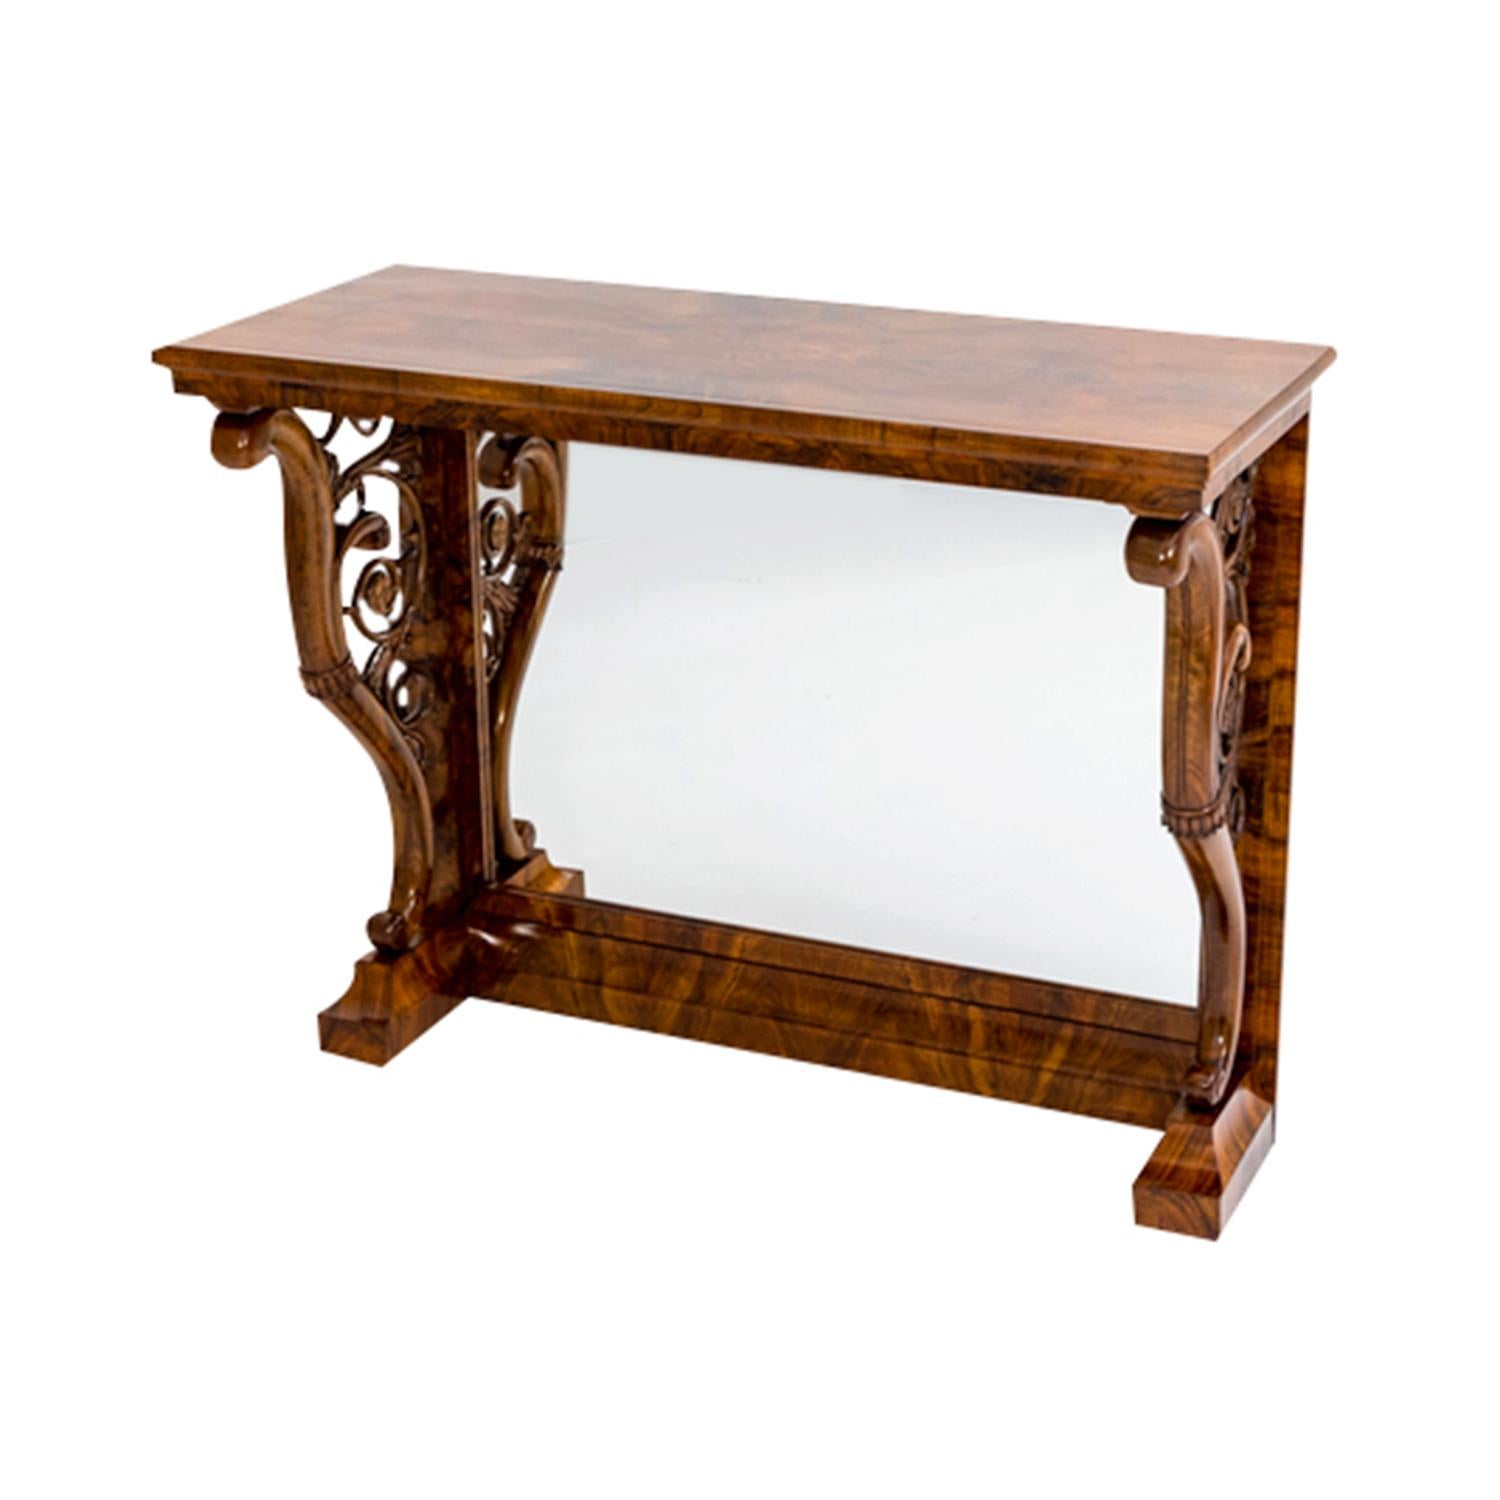 A light-brown, antique German Biedermeier freestanding wall console table made of hand crafted shellac polished Walnut, in good condition. The tall table is composed with the original mirrored back panel and openwork side panels with vine motifs,